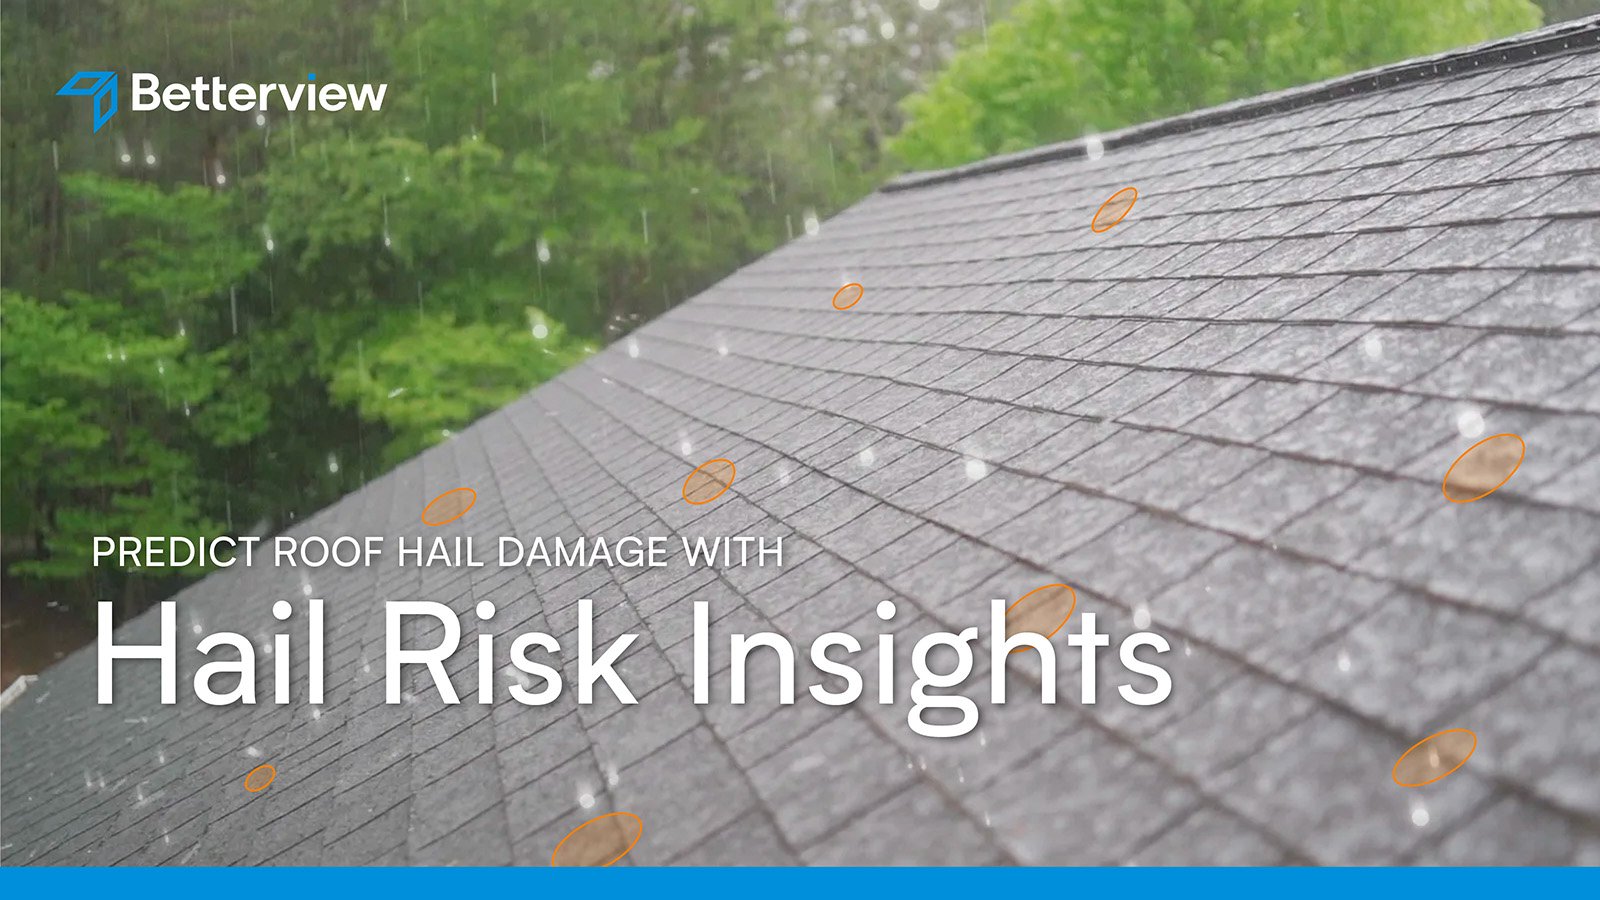 Betterview and Guidewire Premiere Comprehensive Hail Risk Insights to Predict Roof Damage